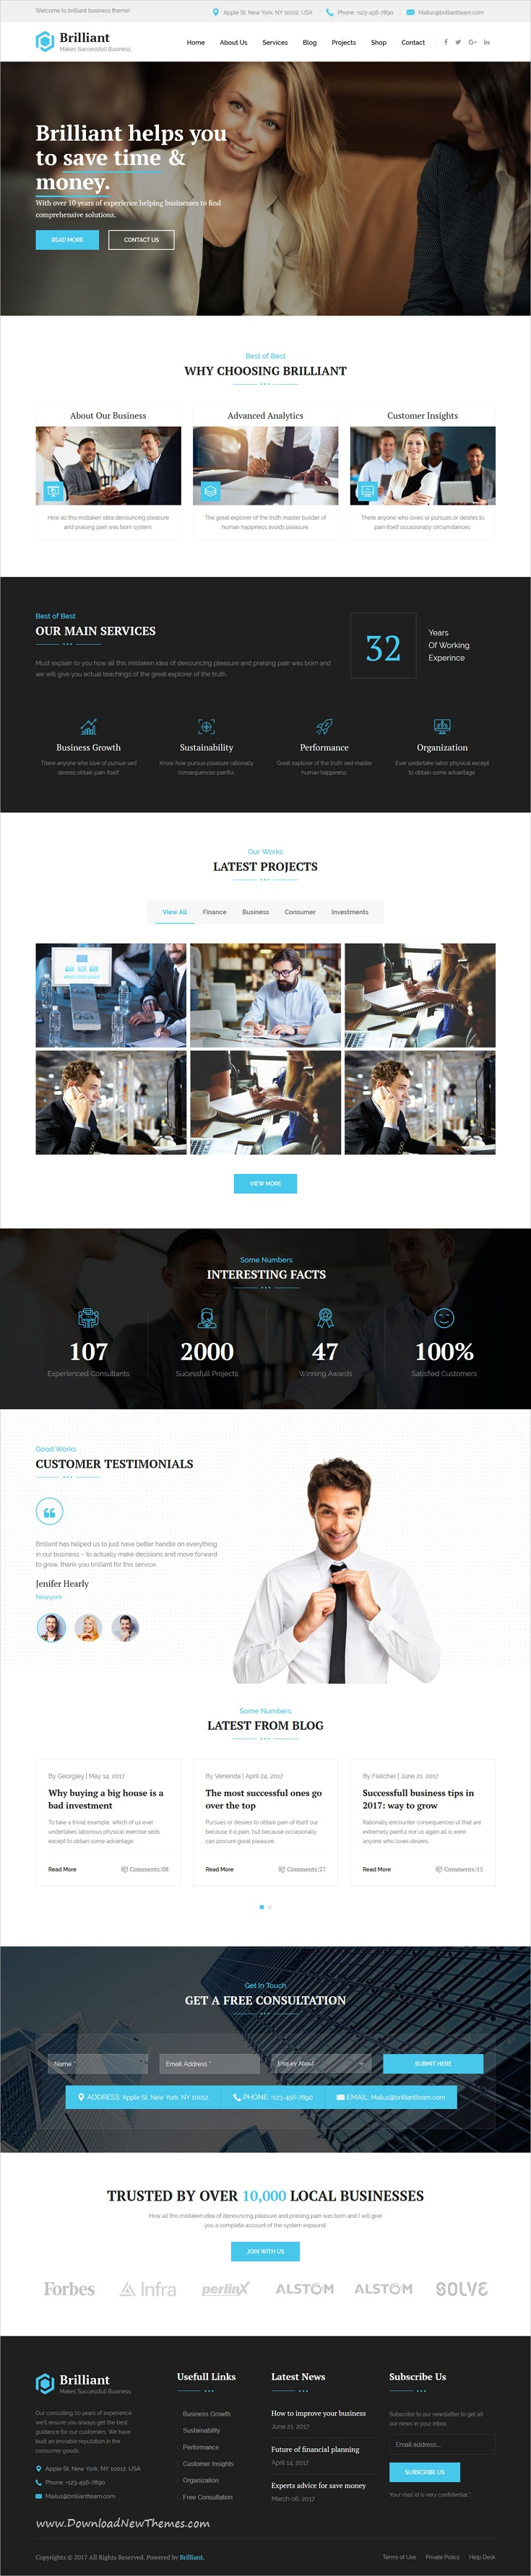 Brilliant Is Clean And Modern Design Responsive #Bootstrap throughout Amazing Professional Website Templates For Business